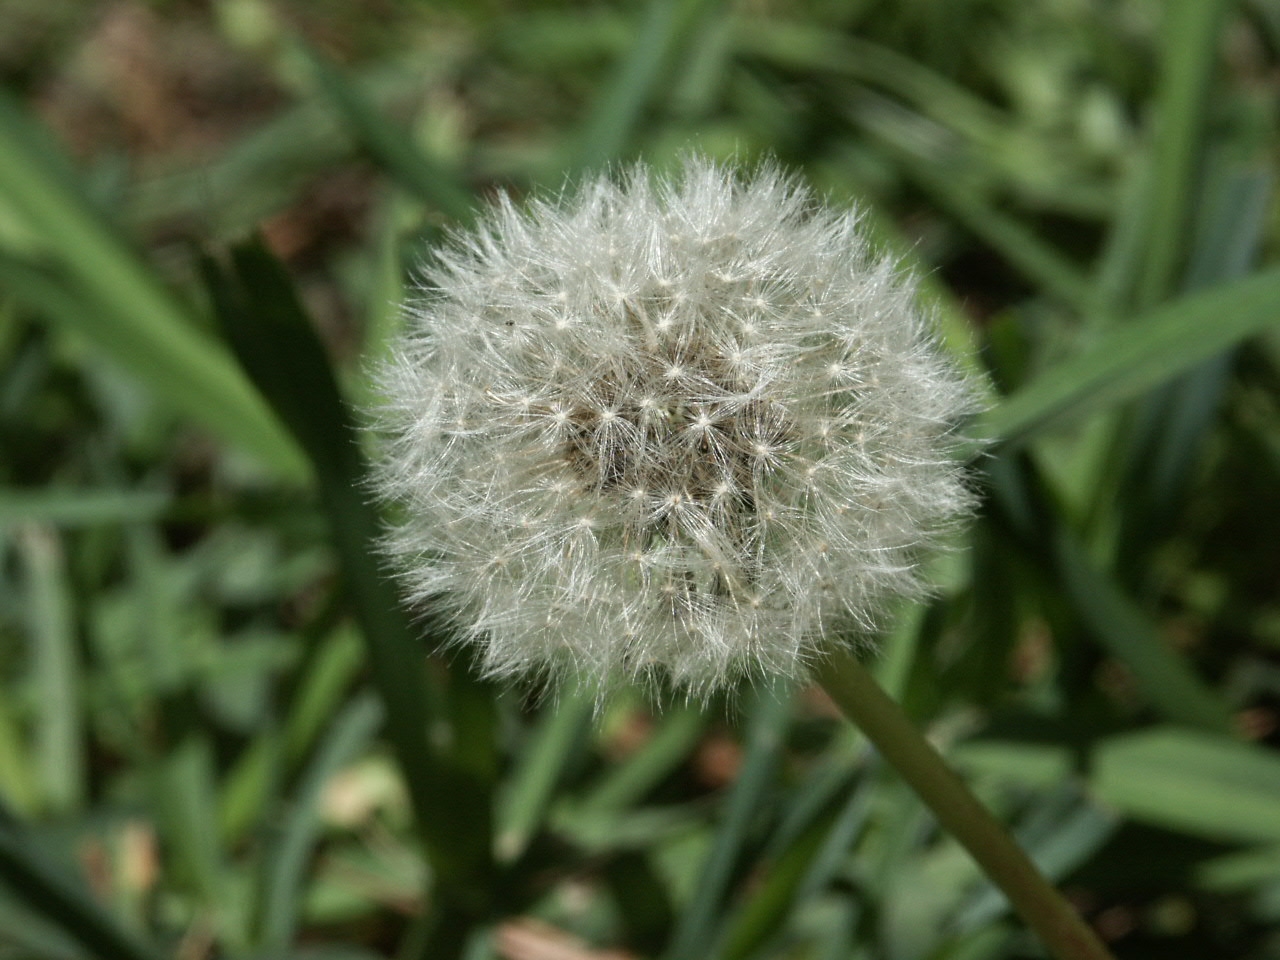 all parts of a dandelion are edible